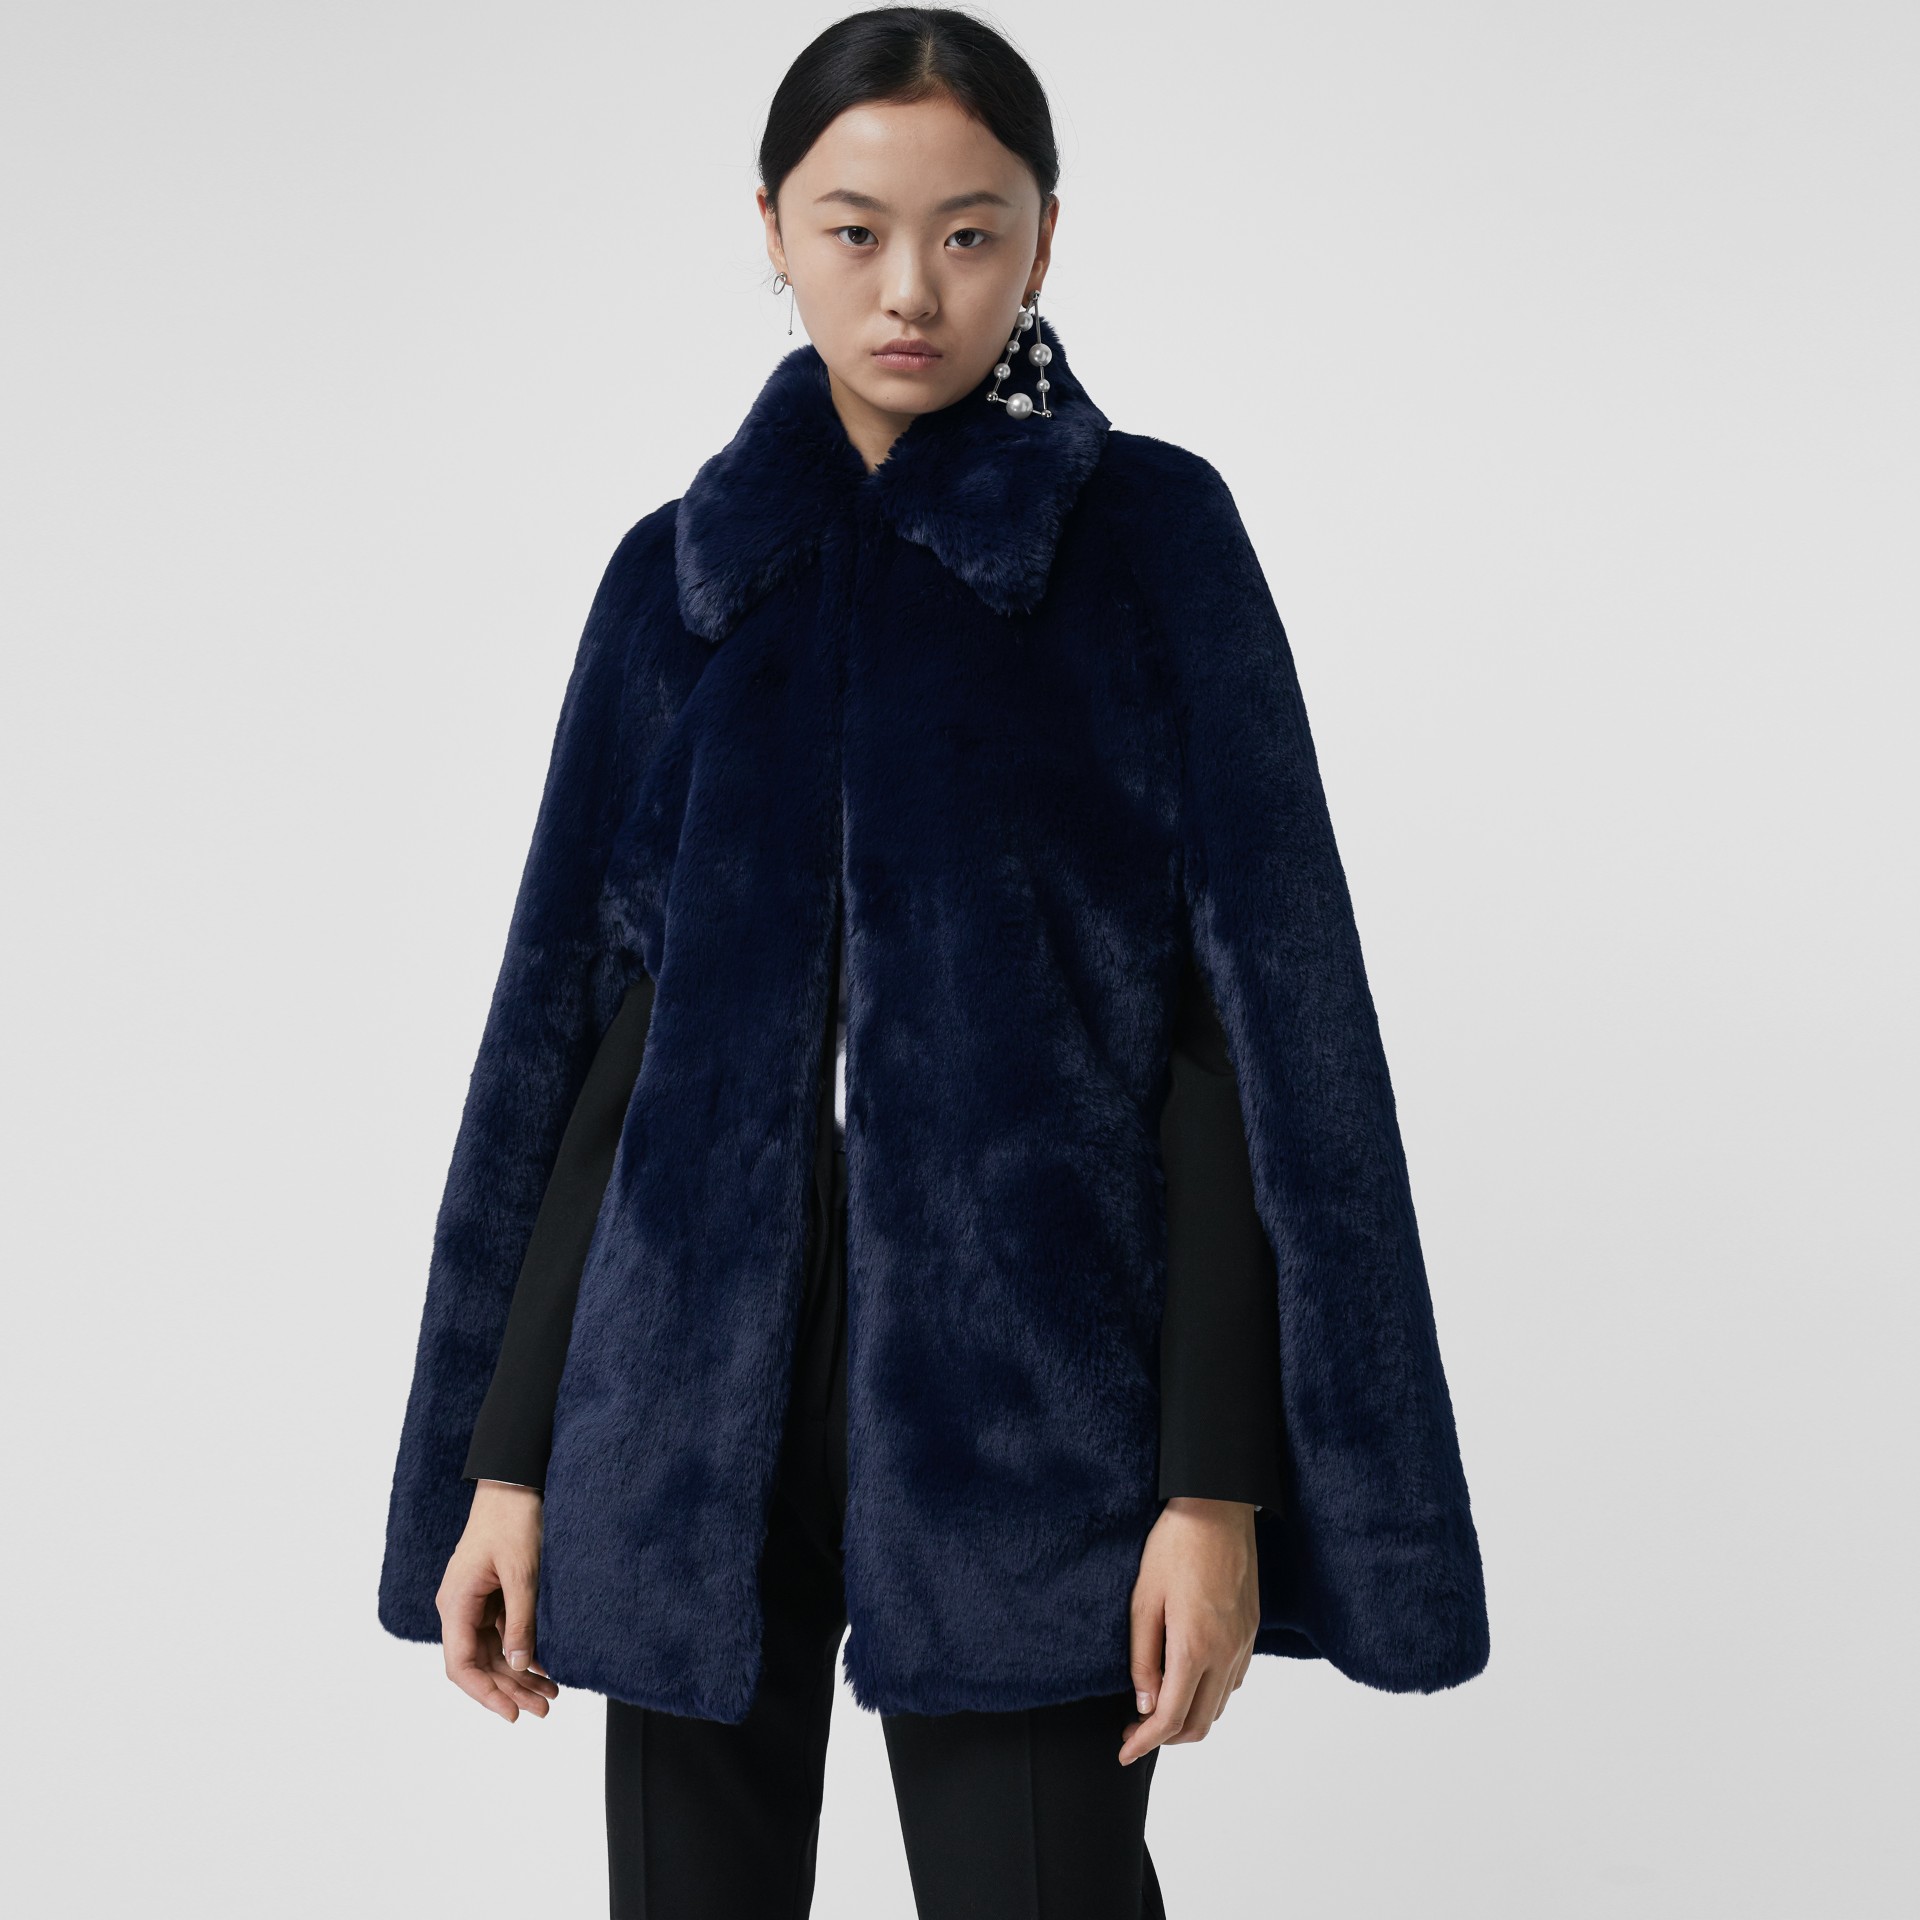 Faux Fur Cape in Navy - Women | Burberry United States